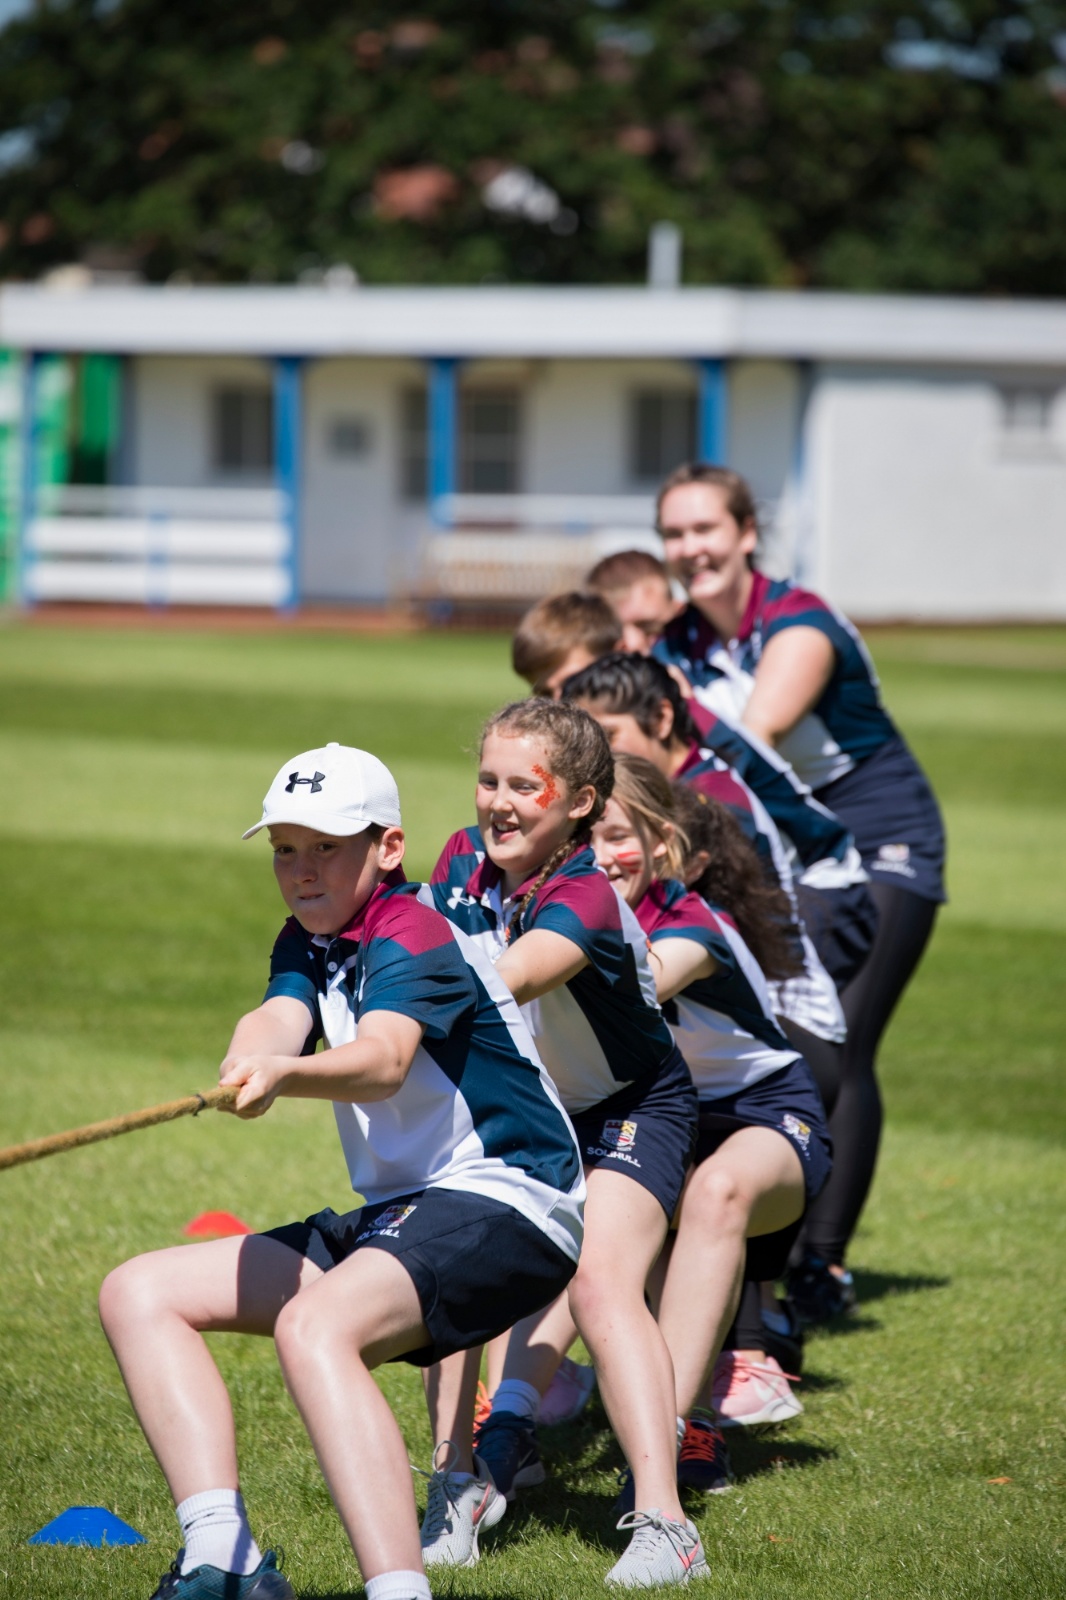 Solihull School - Sports Day 2019